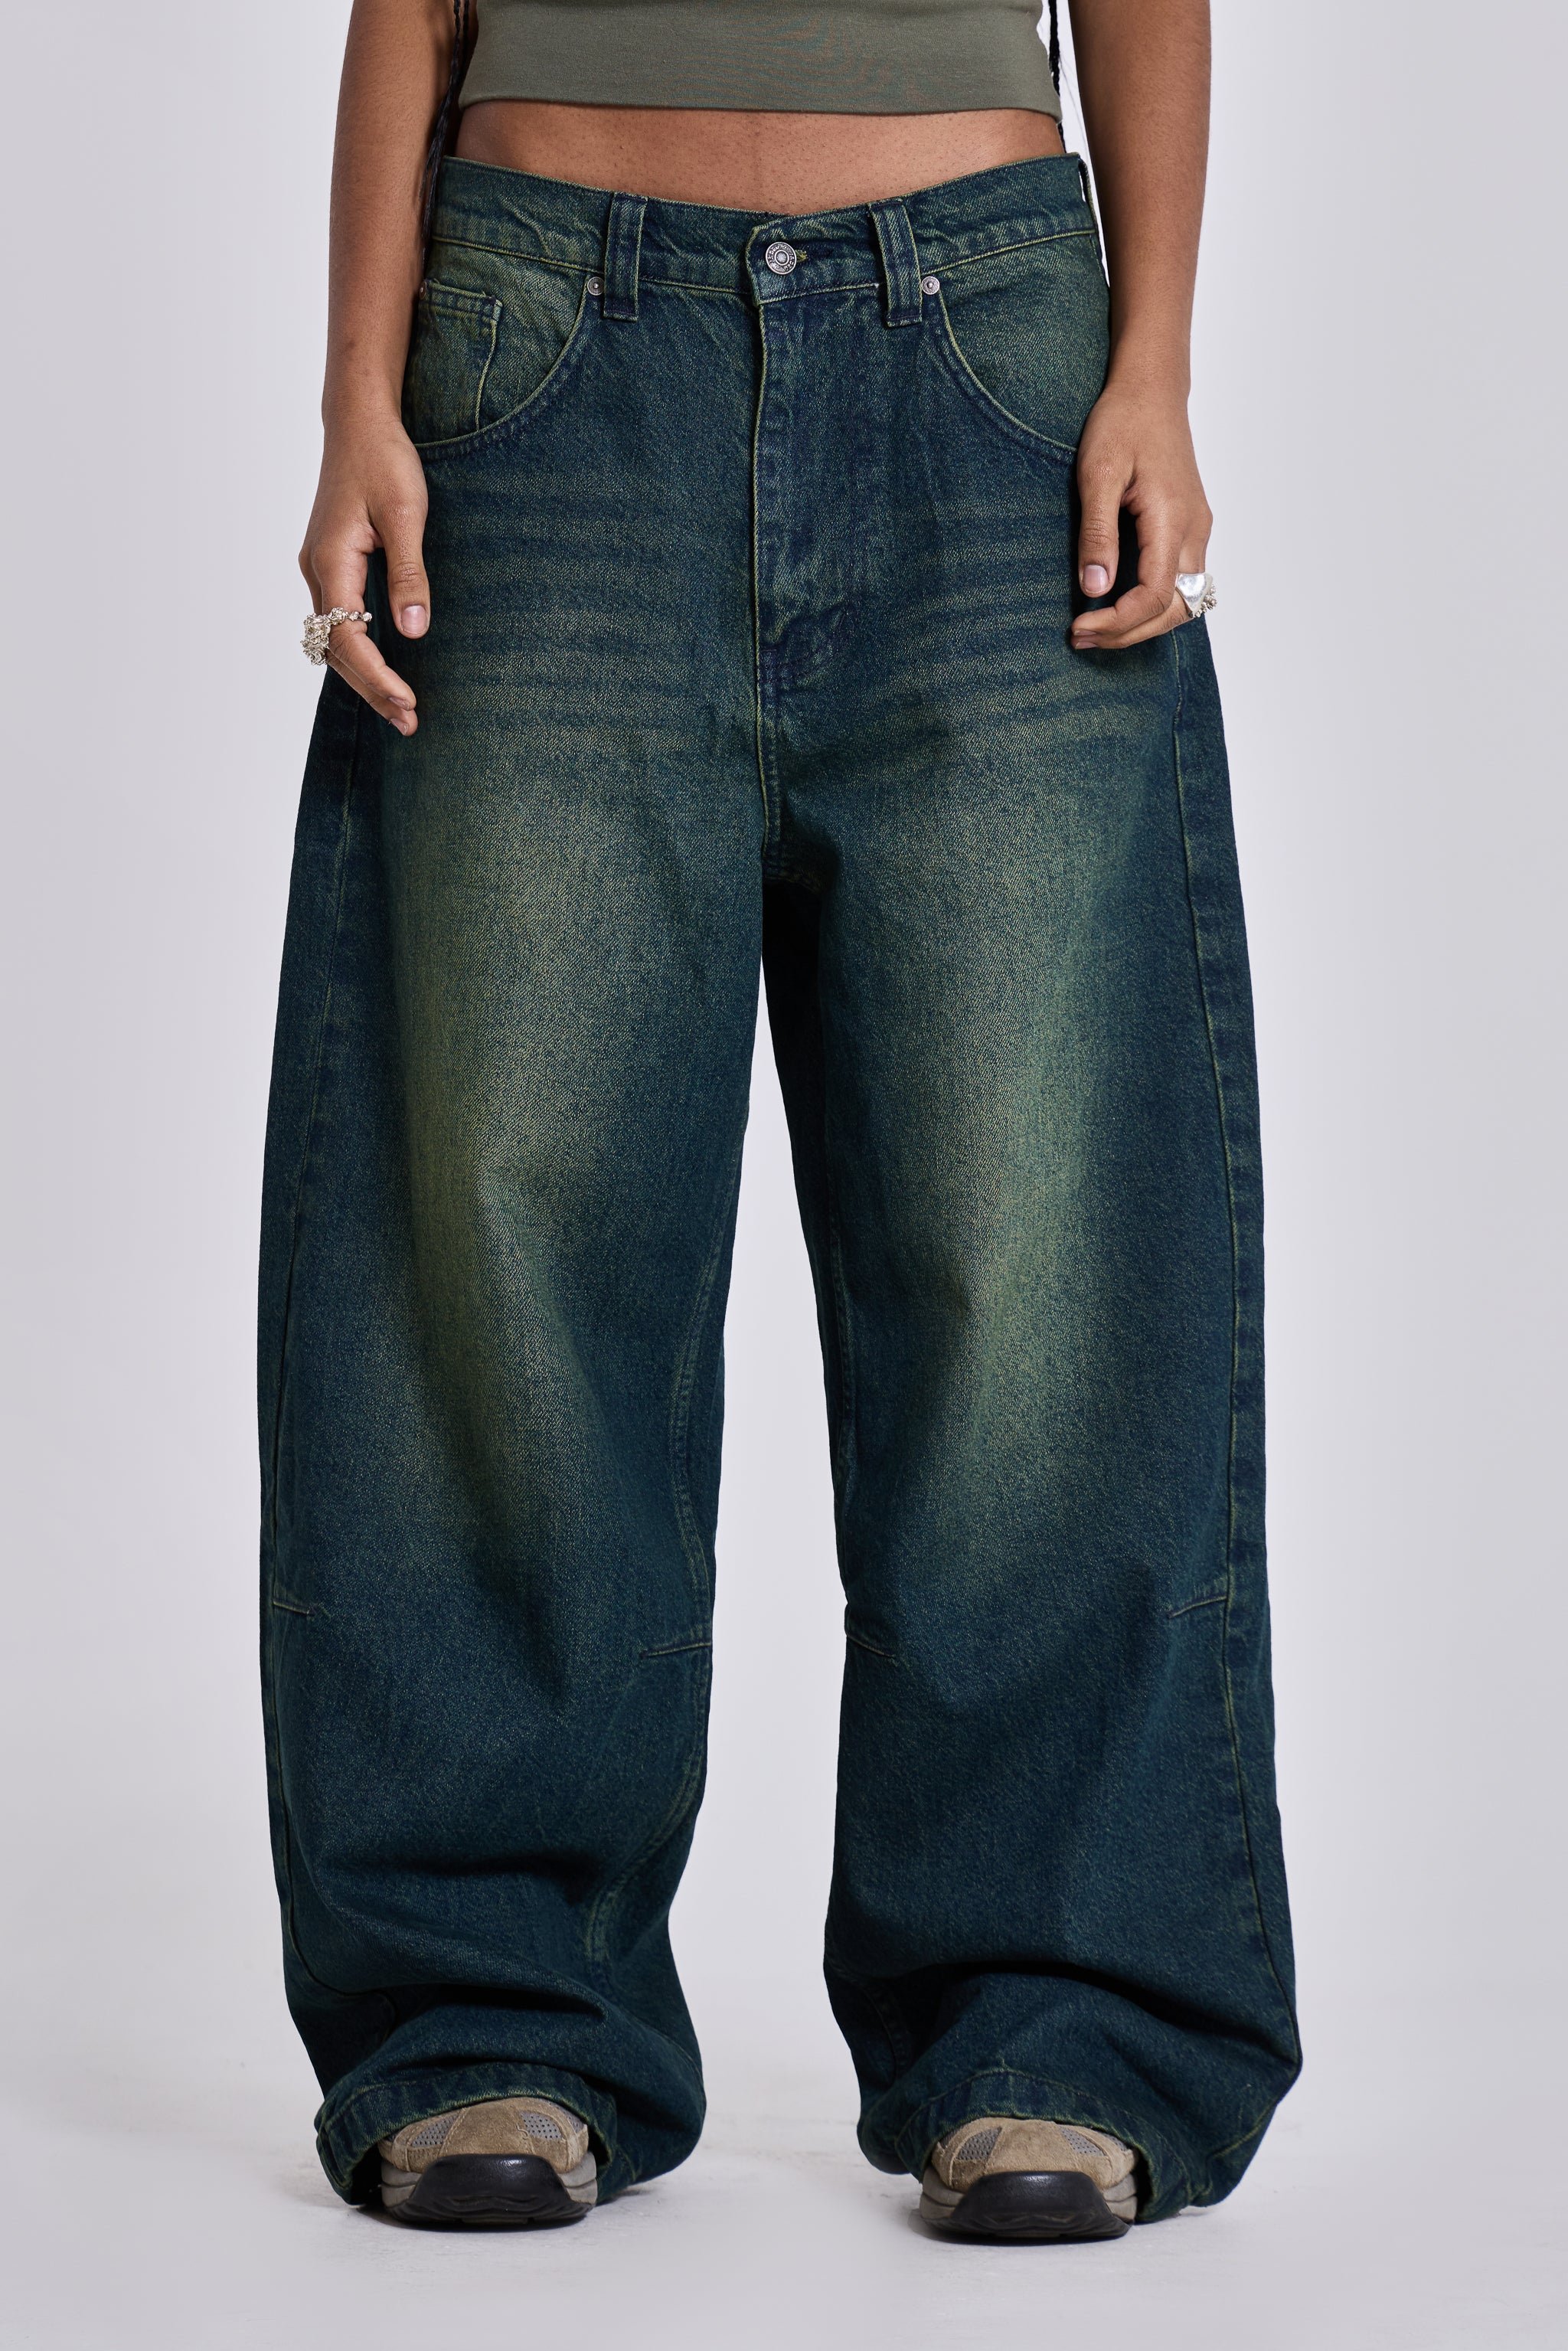 MEITO★新品/JADED LONDON/WB-COLOSSUS JEANS/32インチ